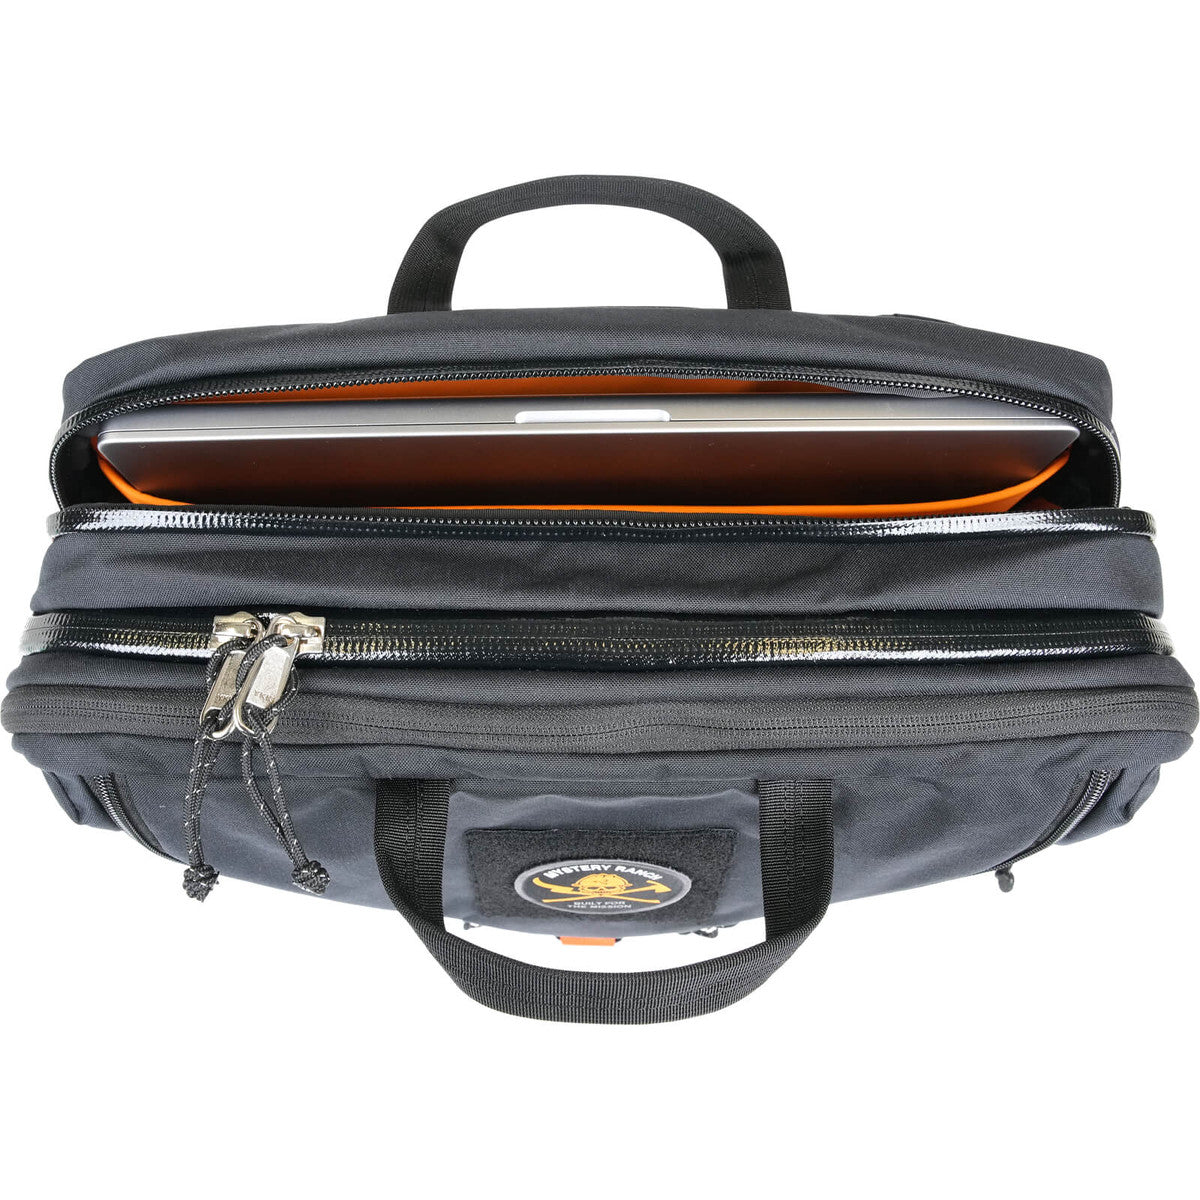 MYSTERY RANCH 3 WAY EXPANDABLE BRIEFCASE 18L